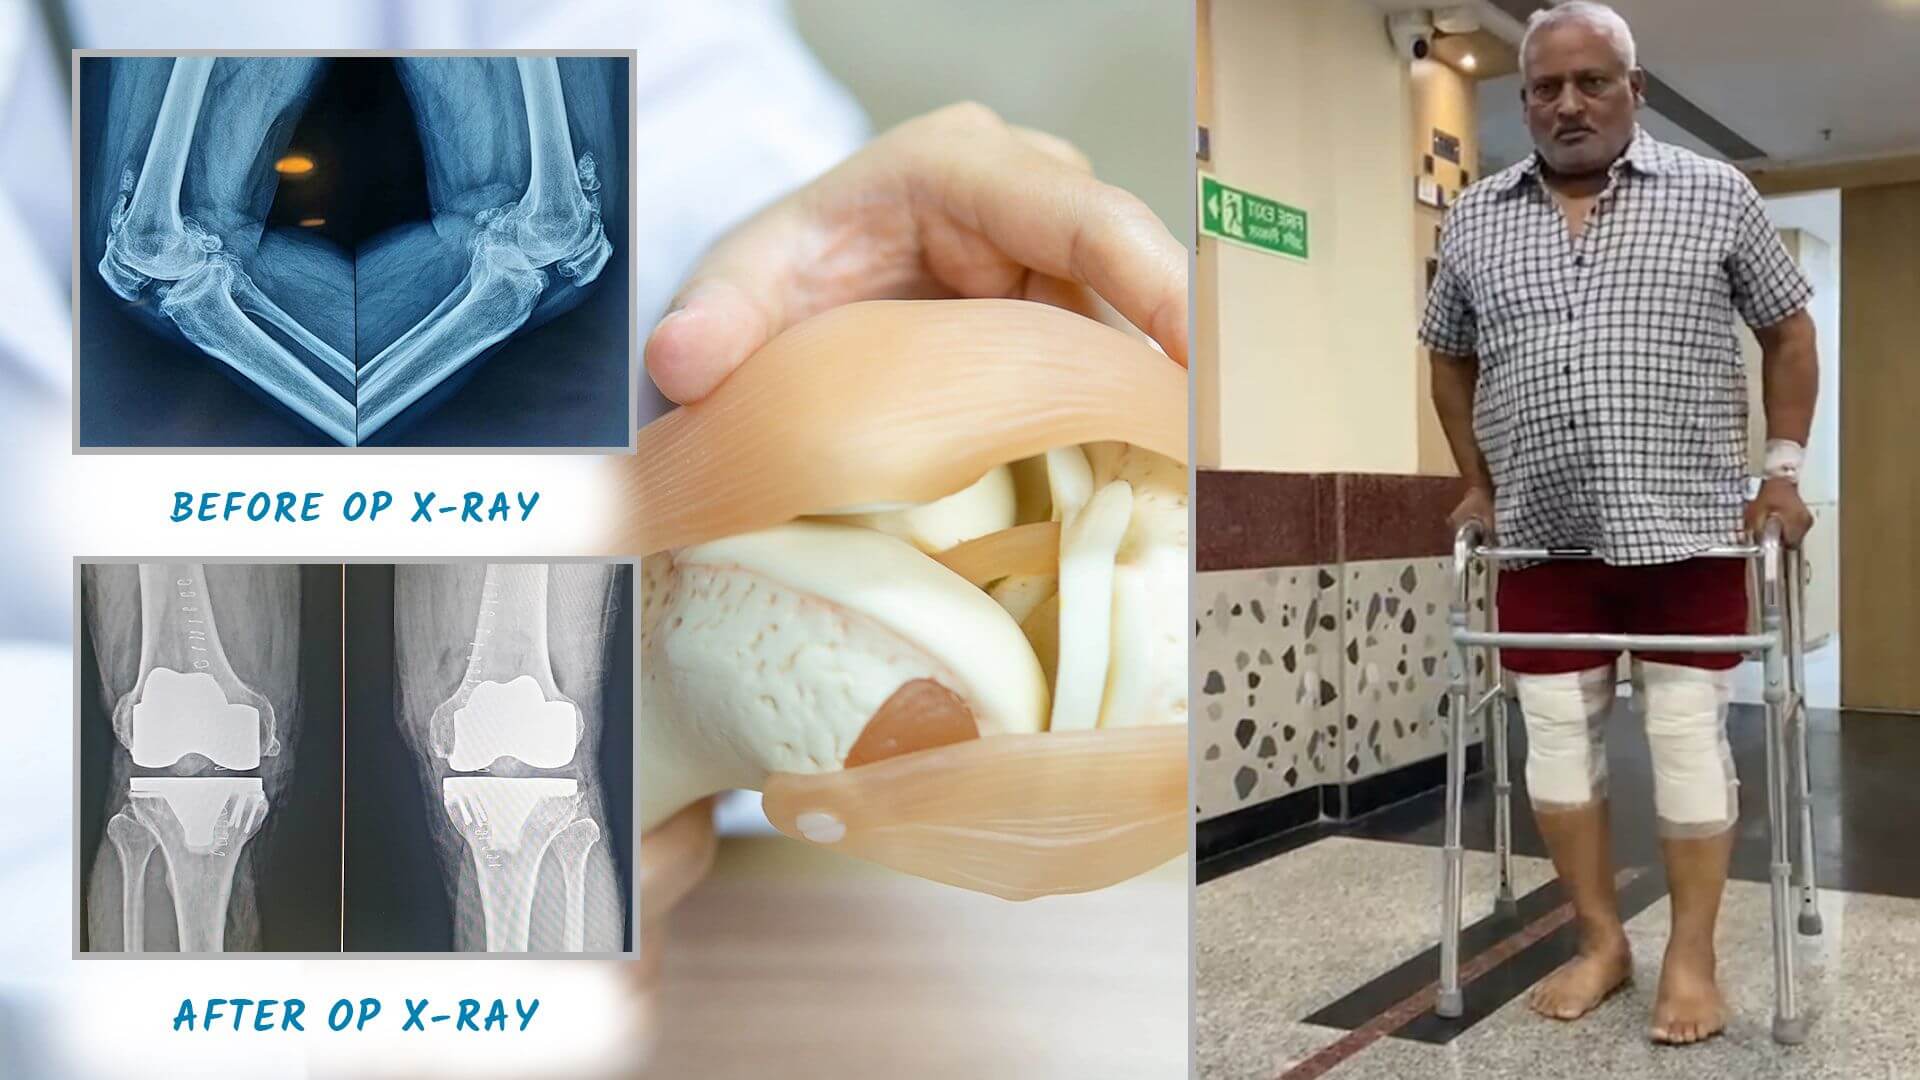 Knee Replacement Surgery by Dr. Nikhil Verma